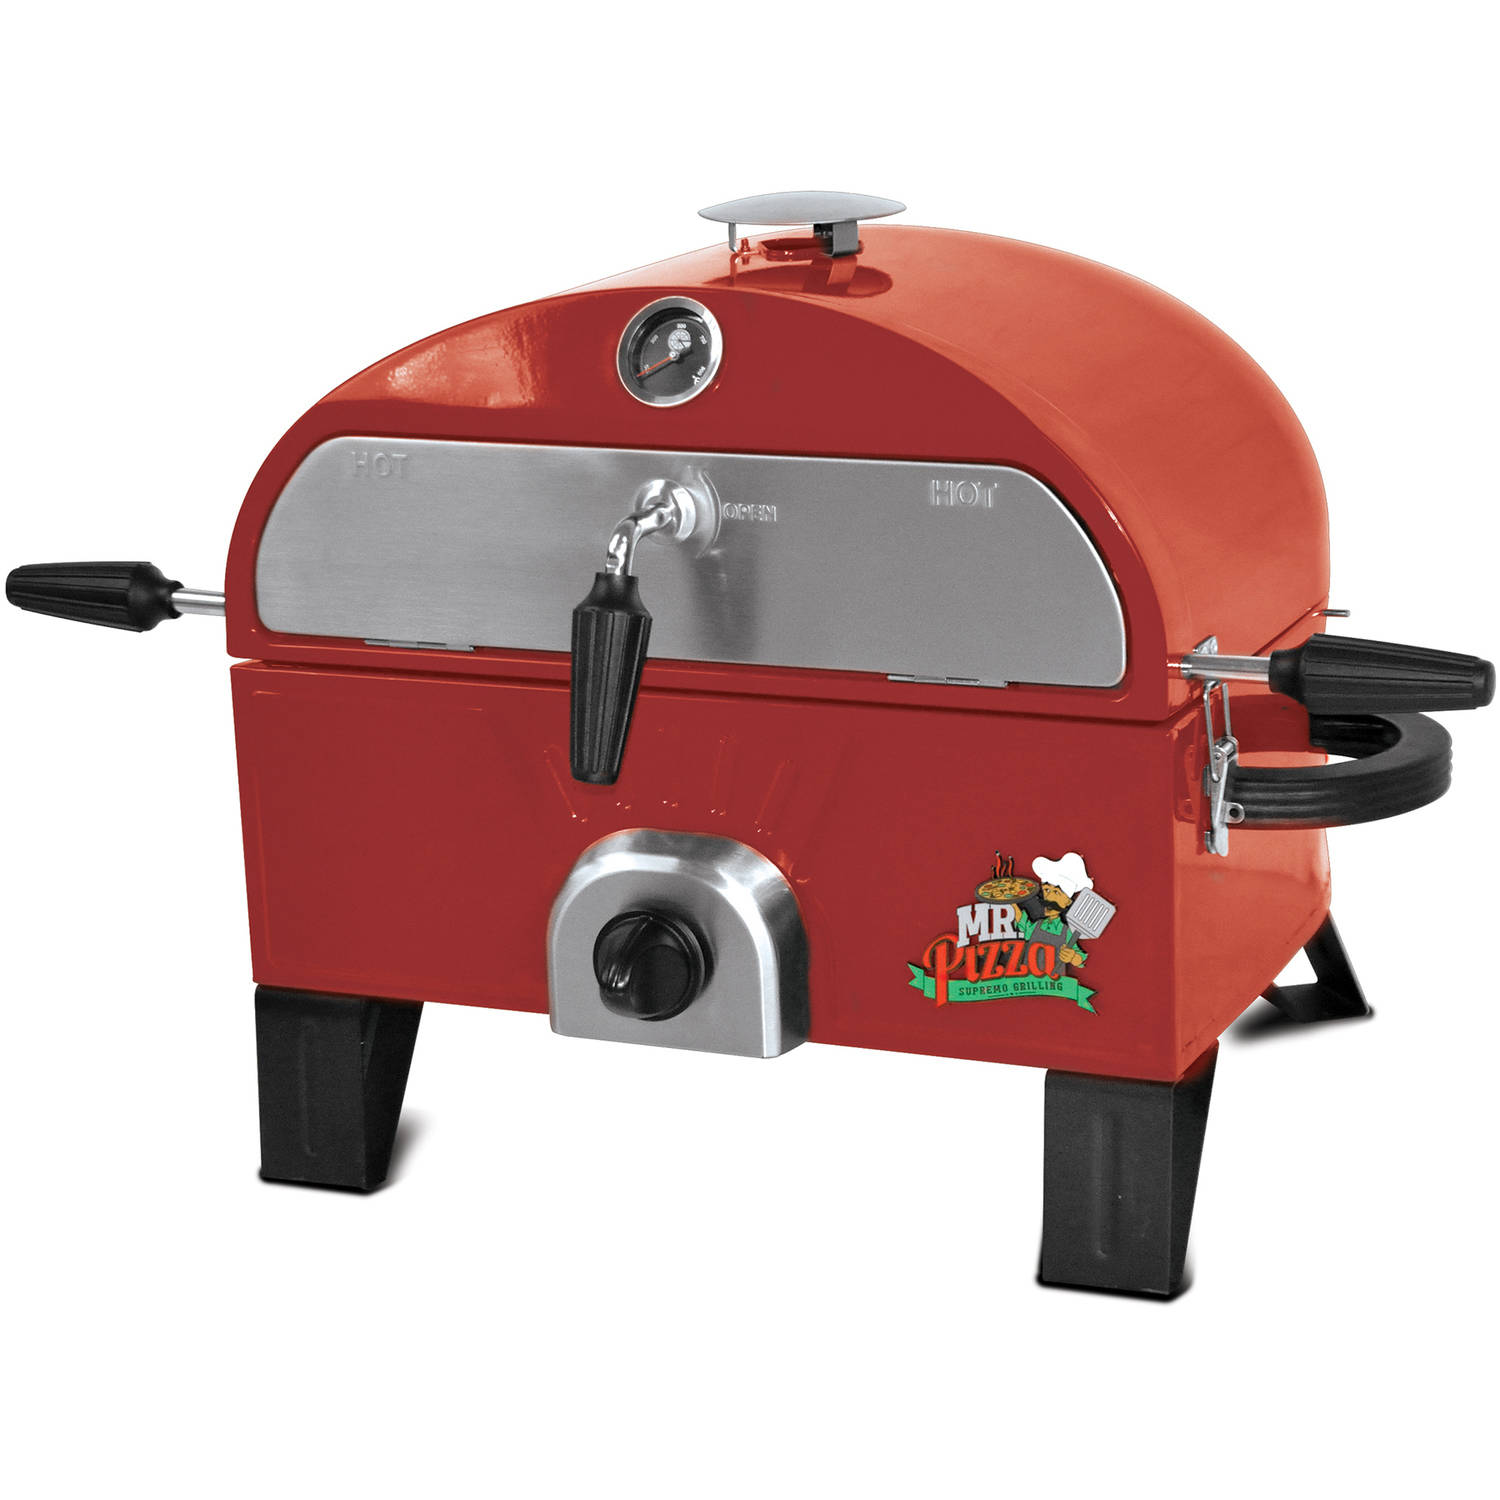 Mr. Pizza Pizza Oven and Grill - image 1 of 2